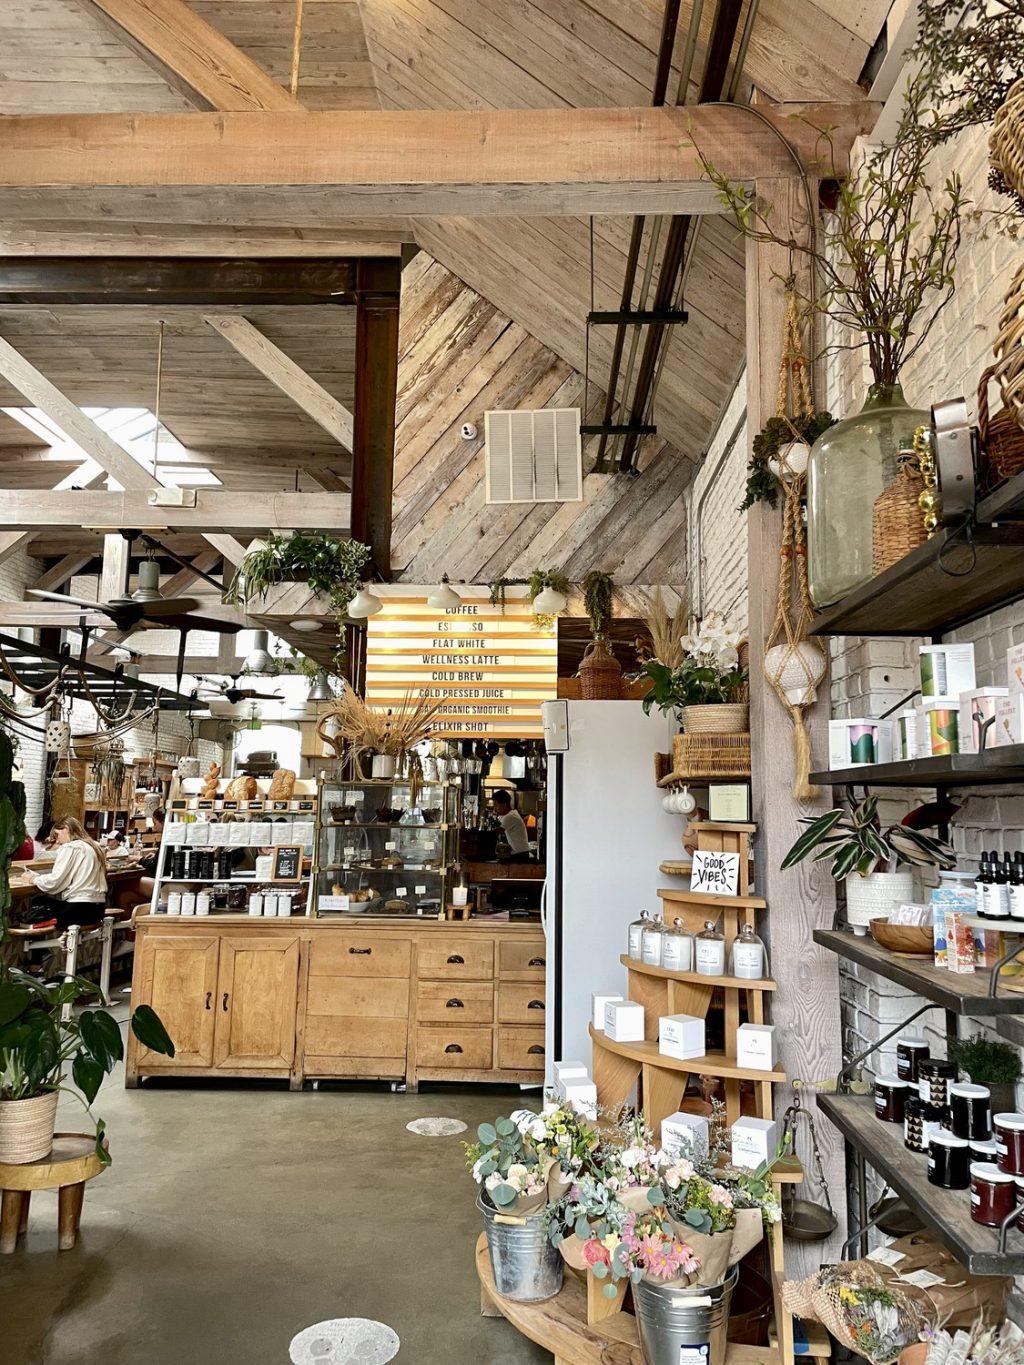 The Butcher's Daughter's in-store shop featuring a variety of home decor Oct. 1. The store offered a selection of candles, flowers and self-care items that align with the company's holistic approach.